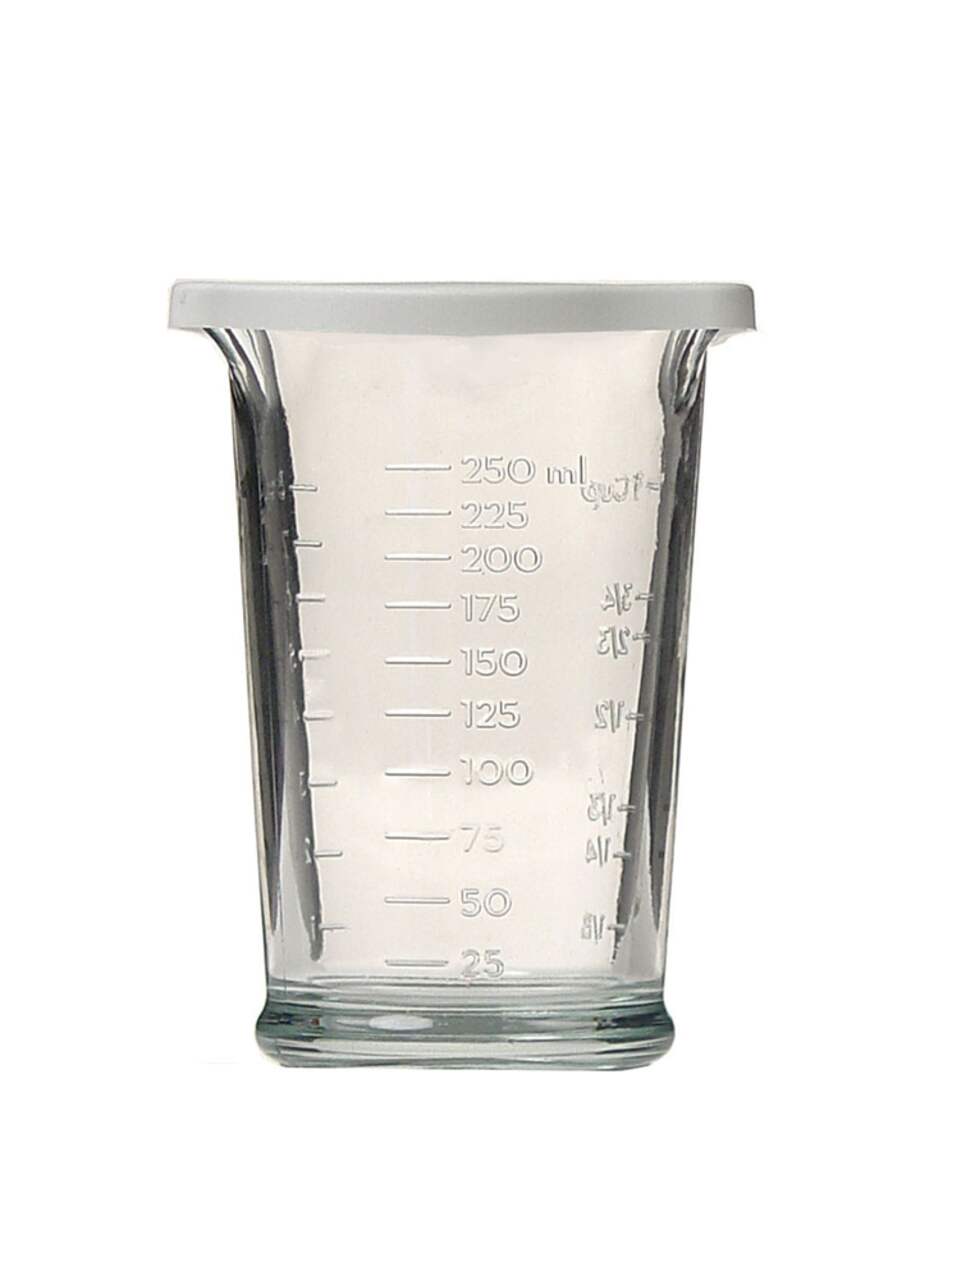 Anchor Hocking Triple-Pour Measuring Cup with Plastic Lid, 250-ml